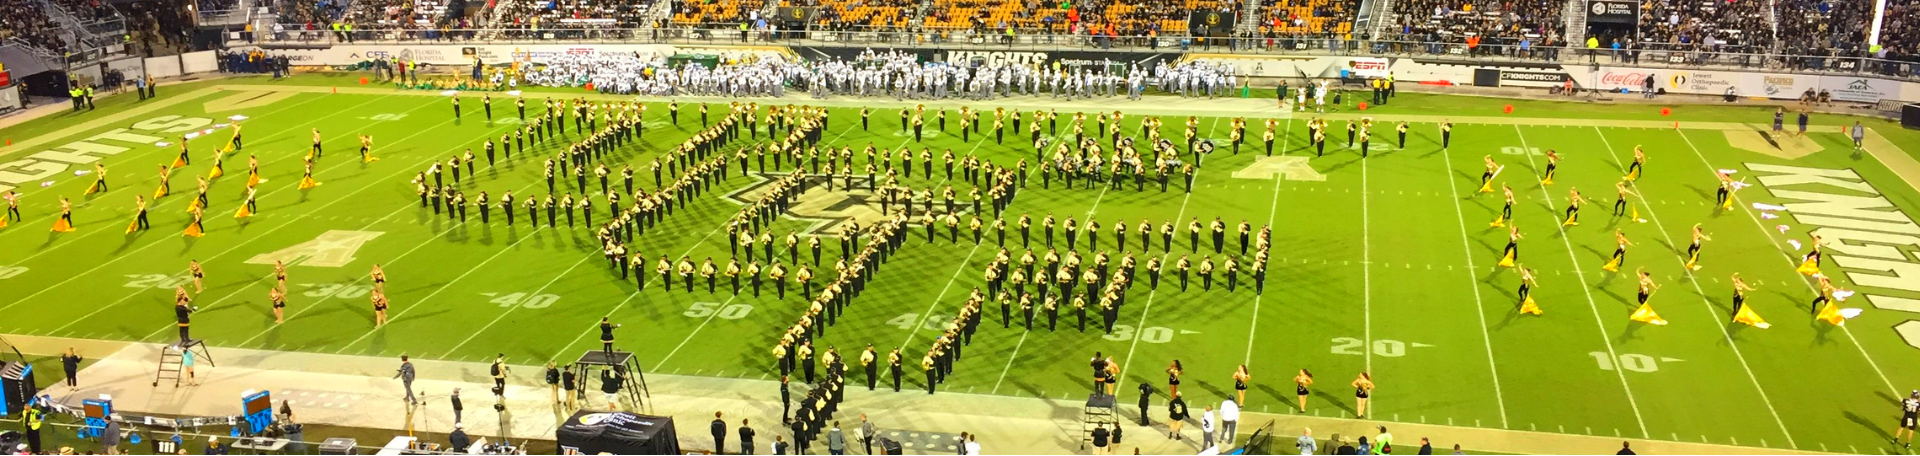 ucf formation on football field